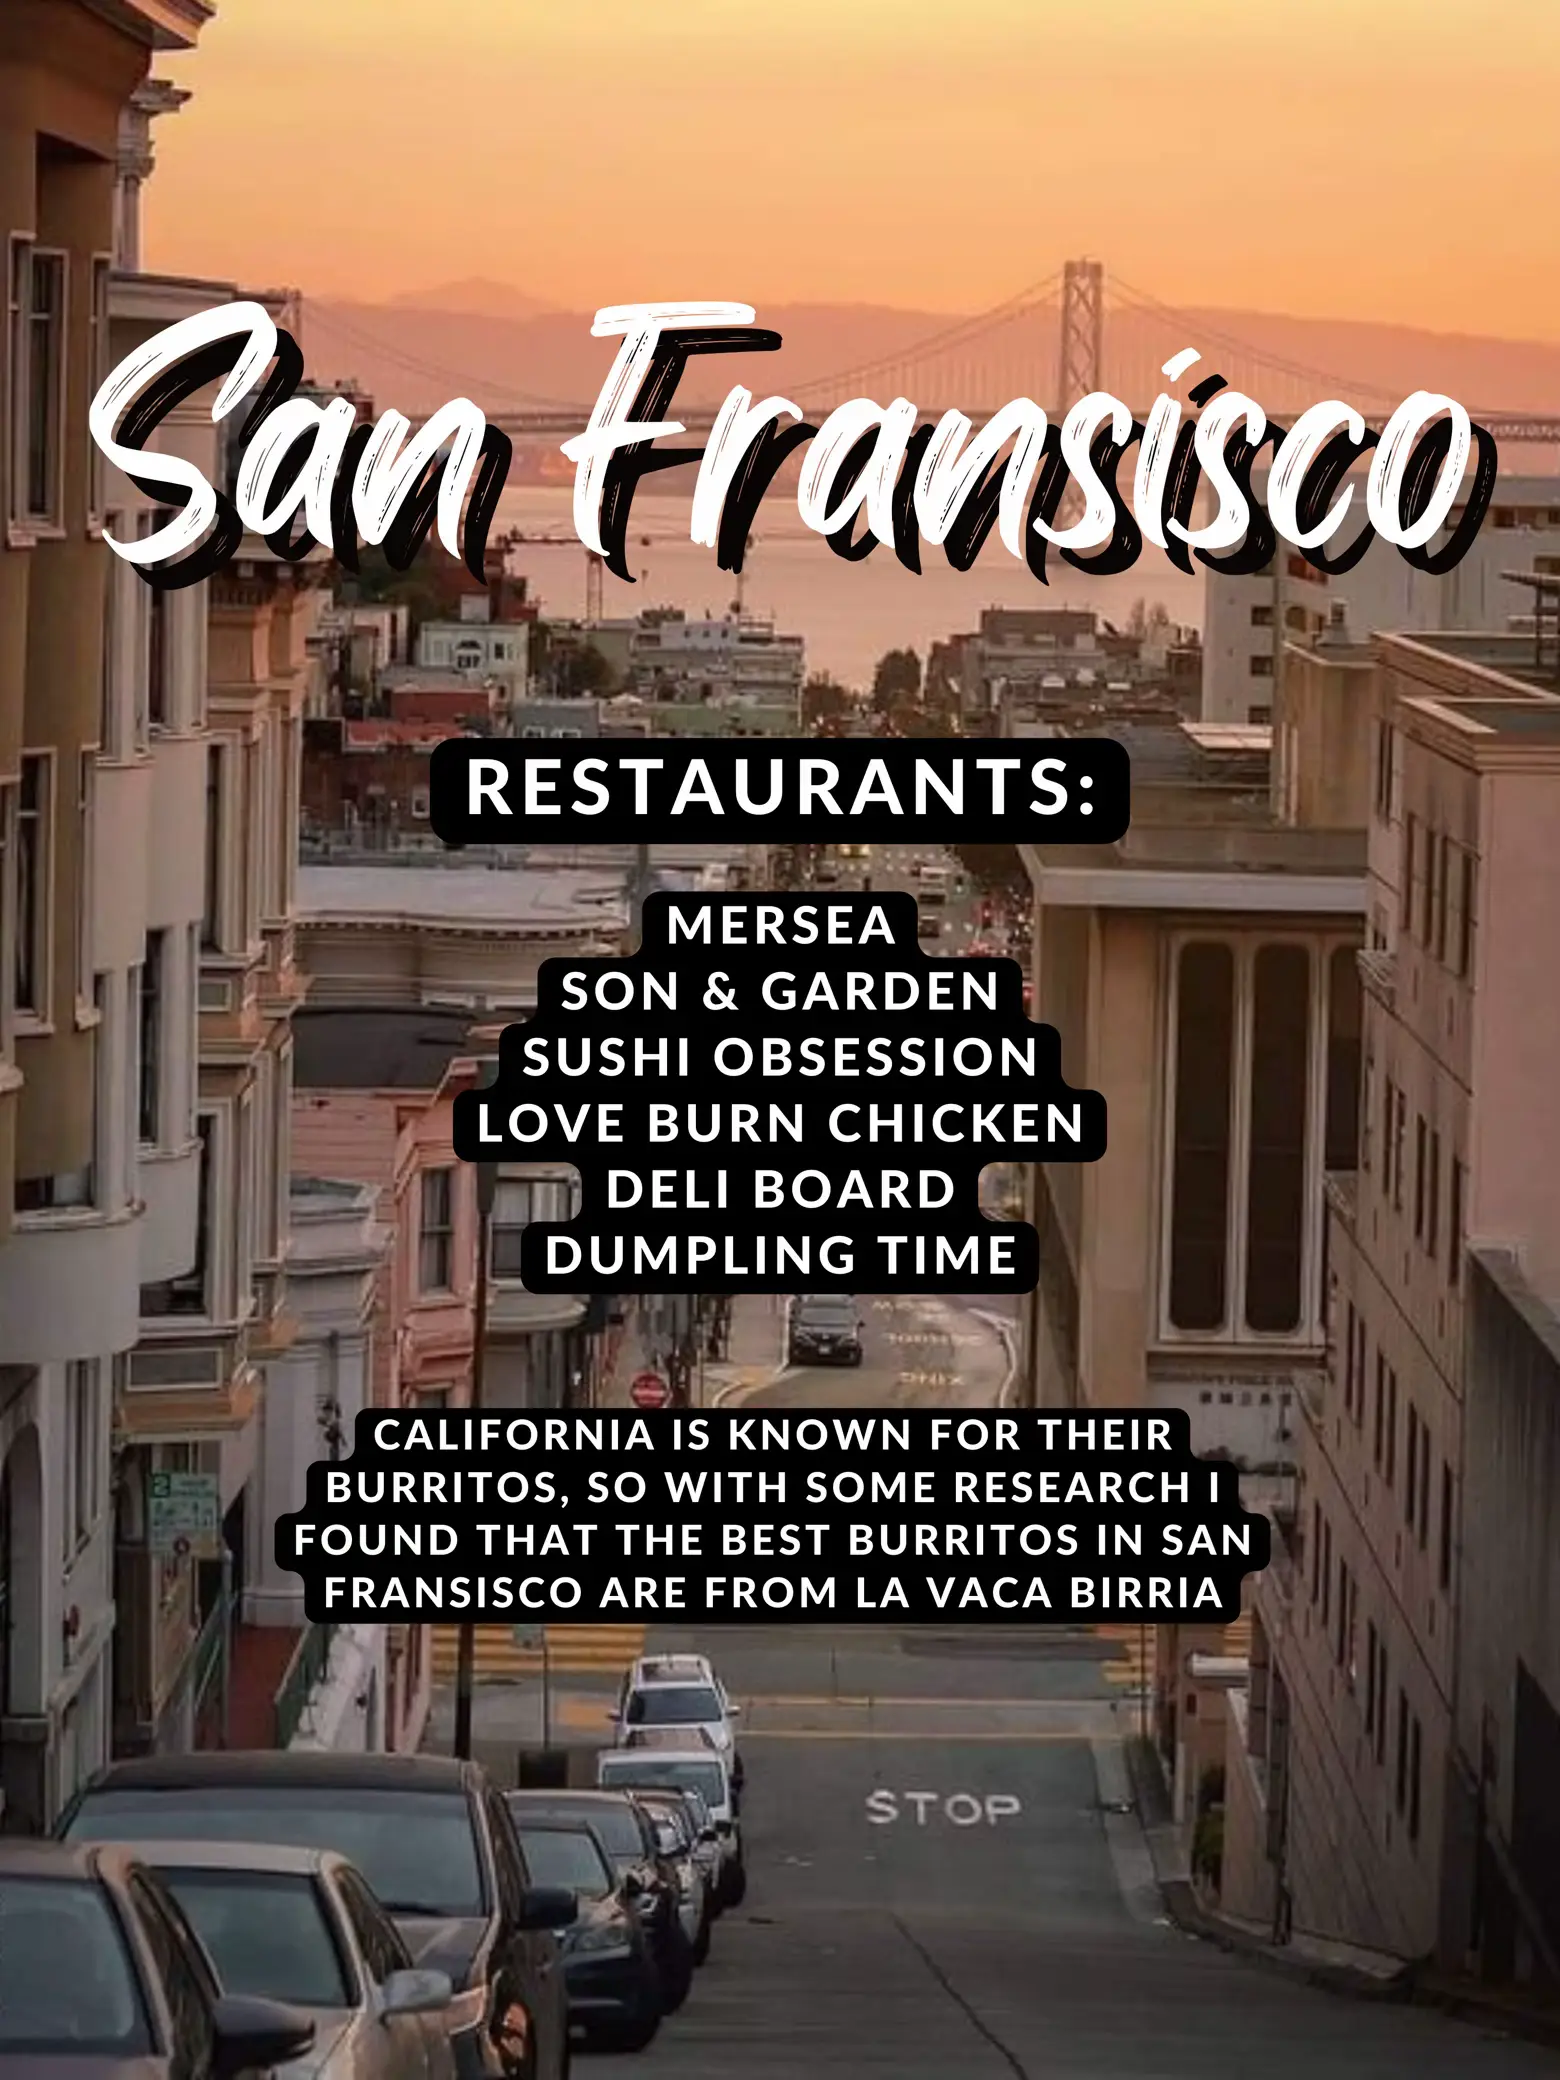  A list of restaurants in San Francisco with descriptions